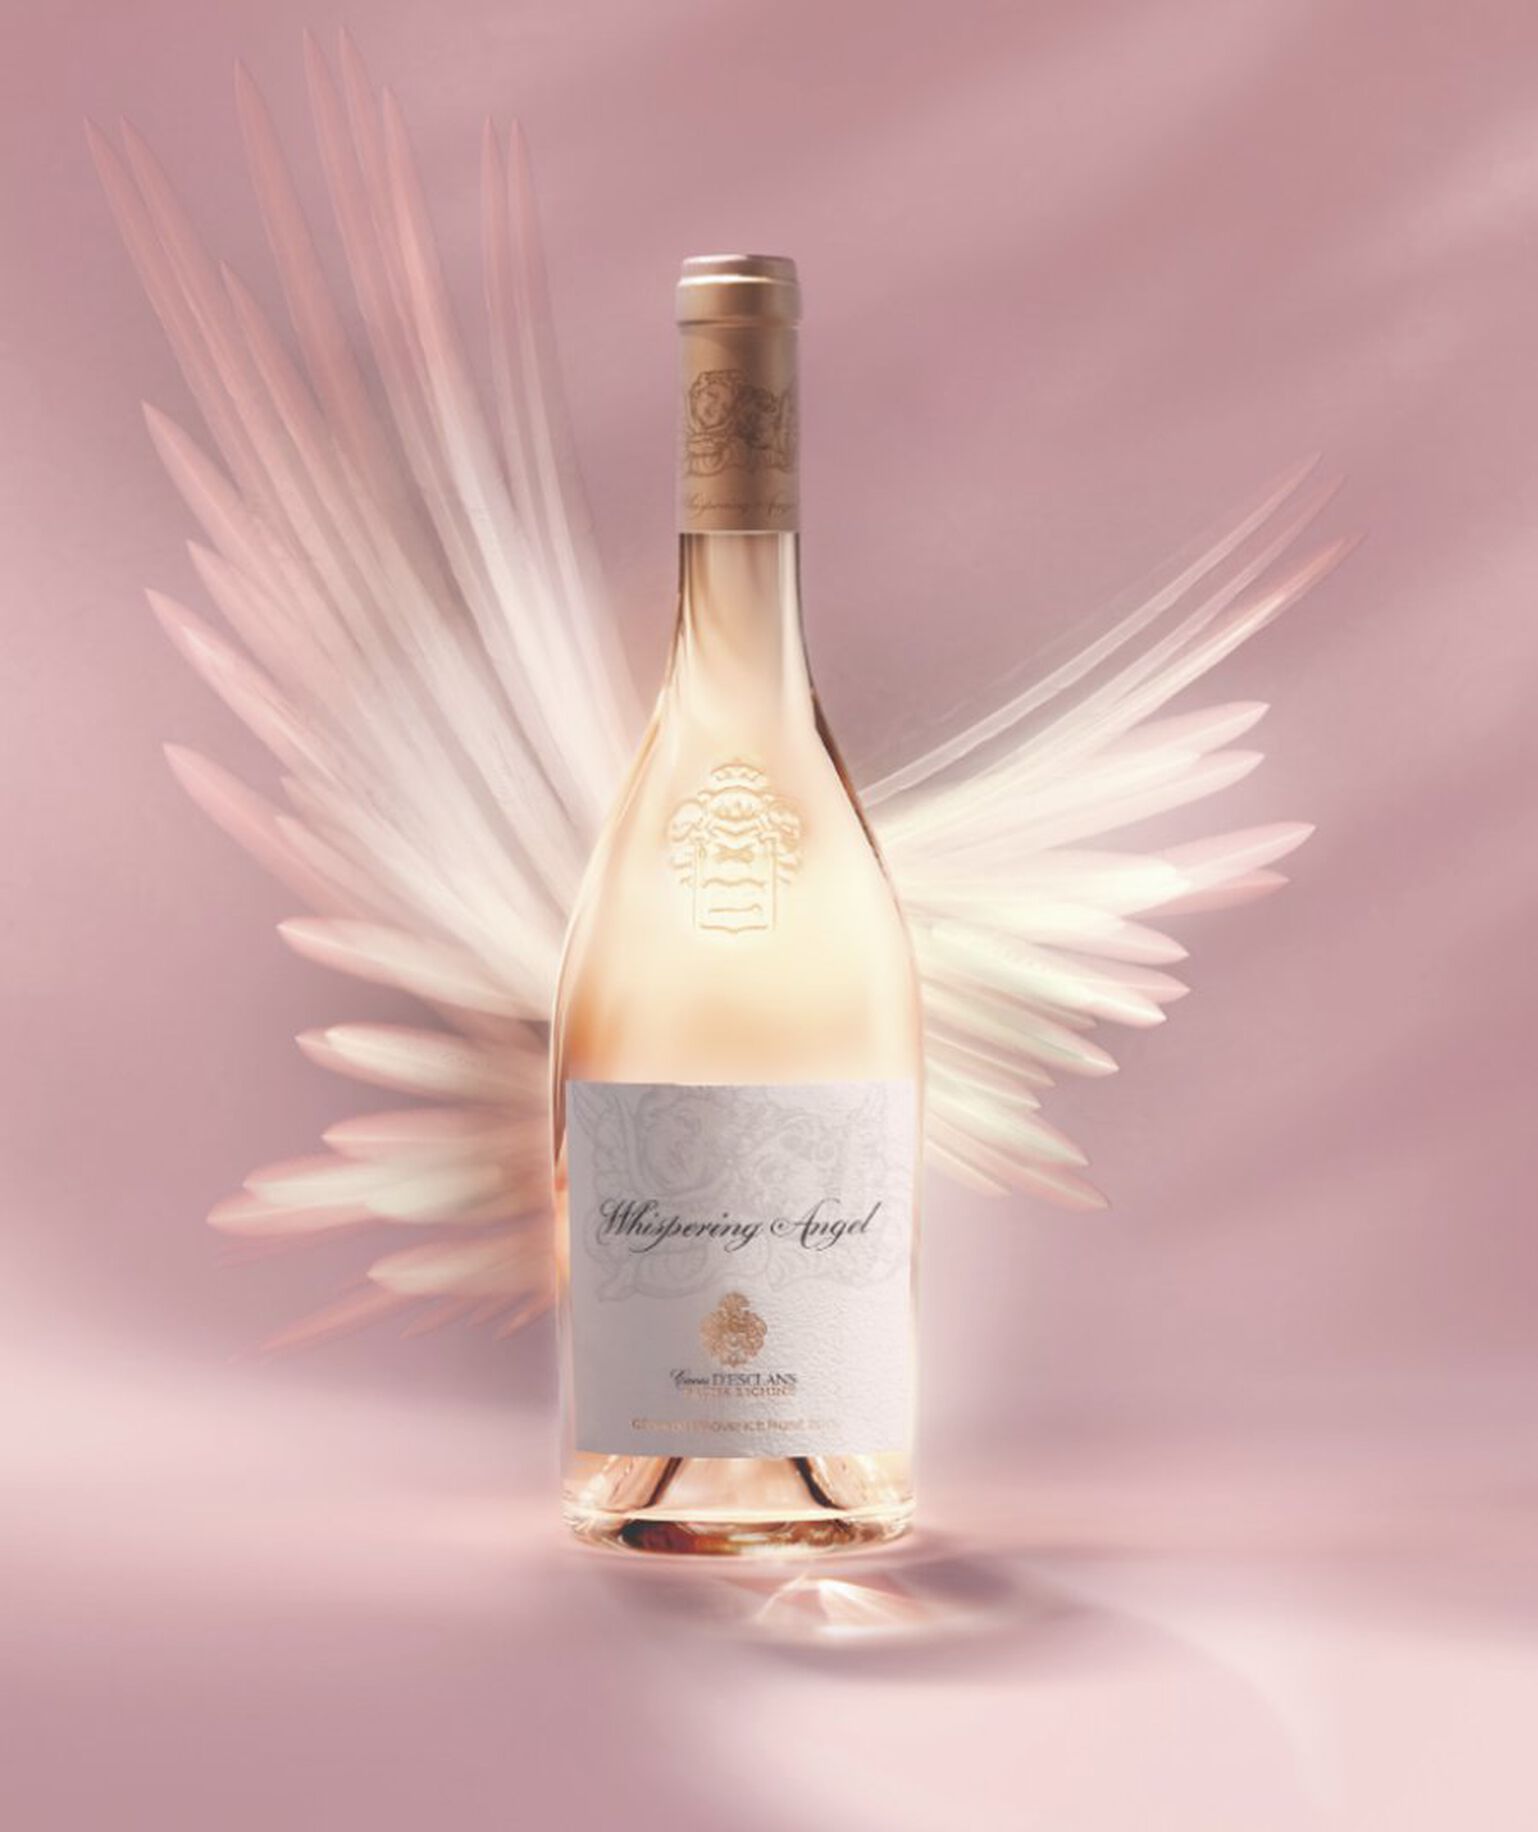 SAY “I LOVE YOU” WITH A SINGLE ROSÉ • GIFT WHISPERING ANGEL 